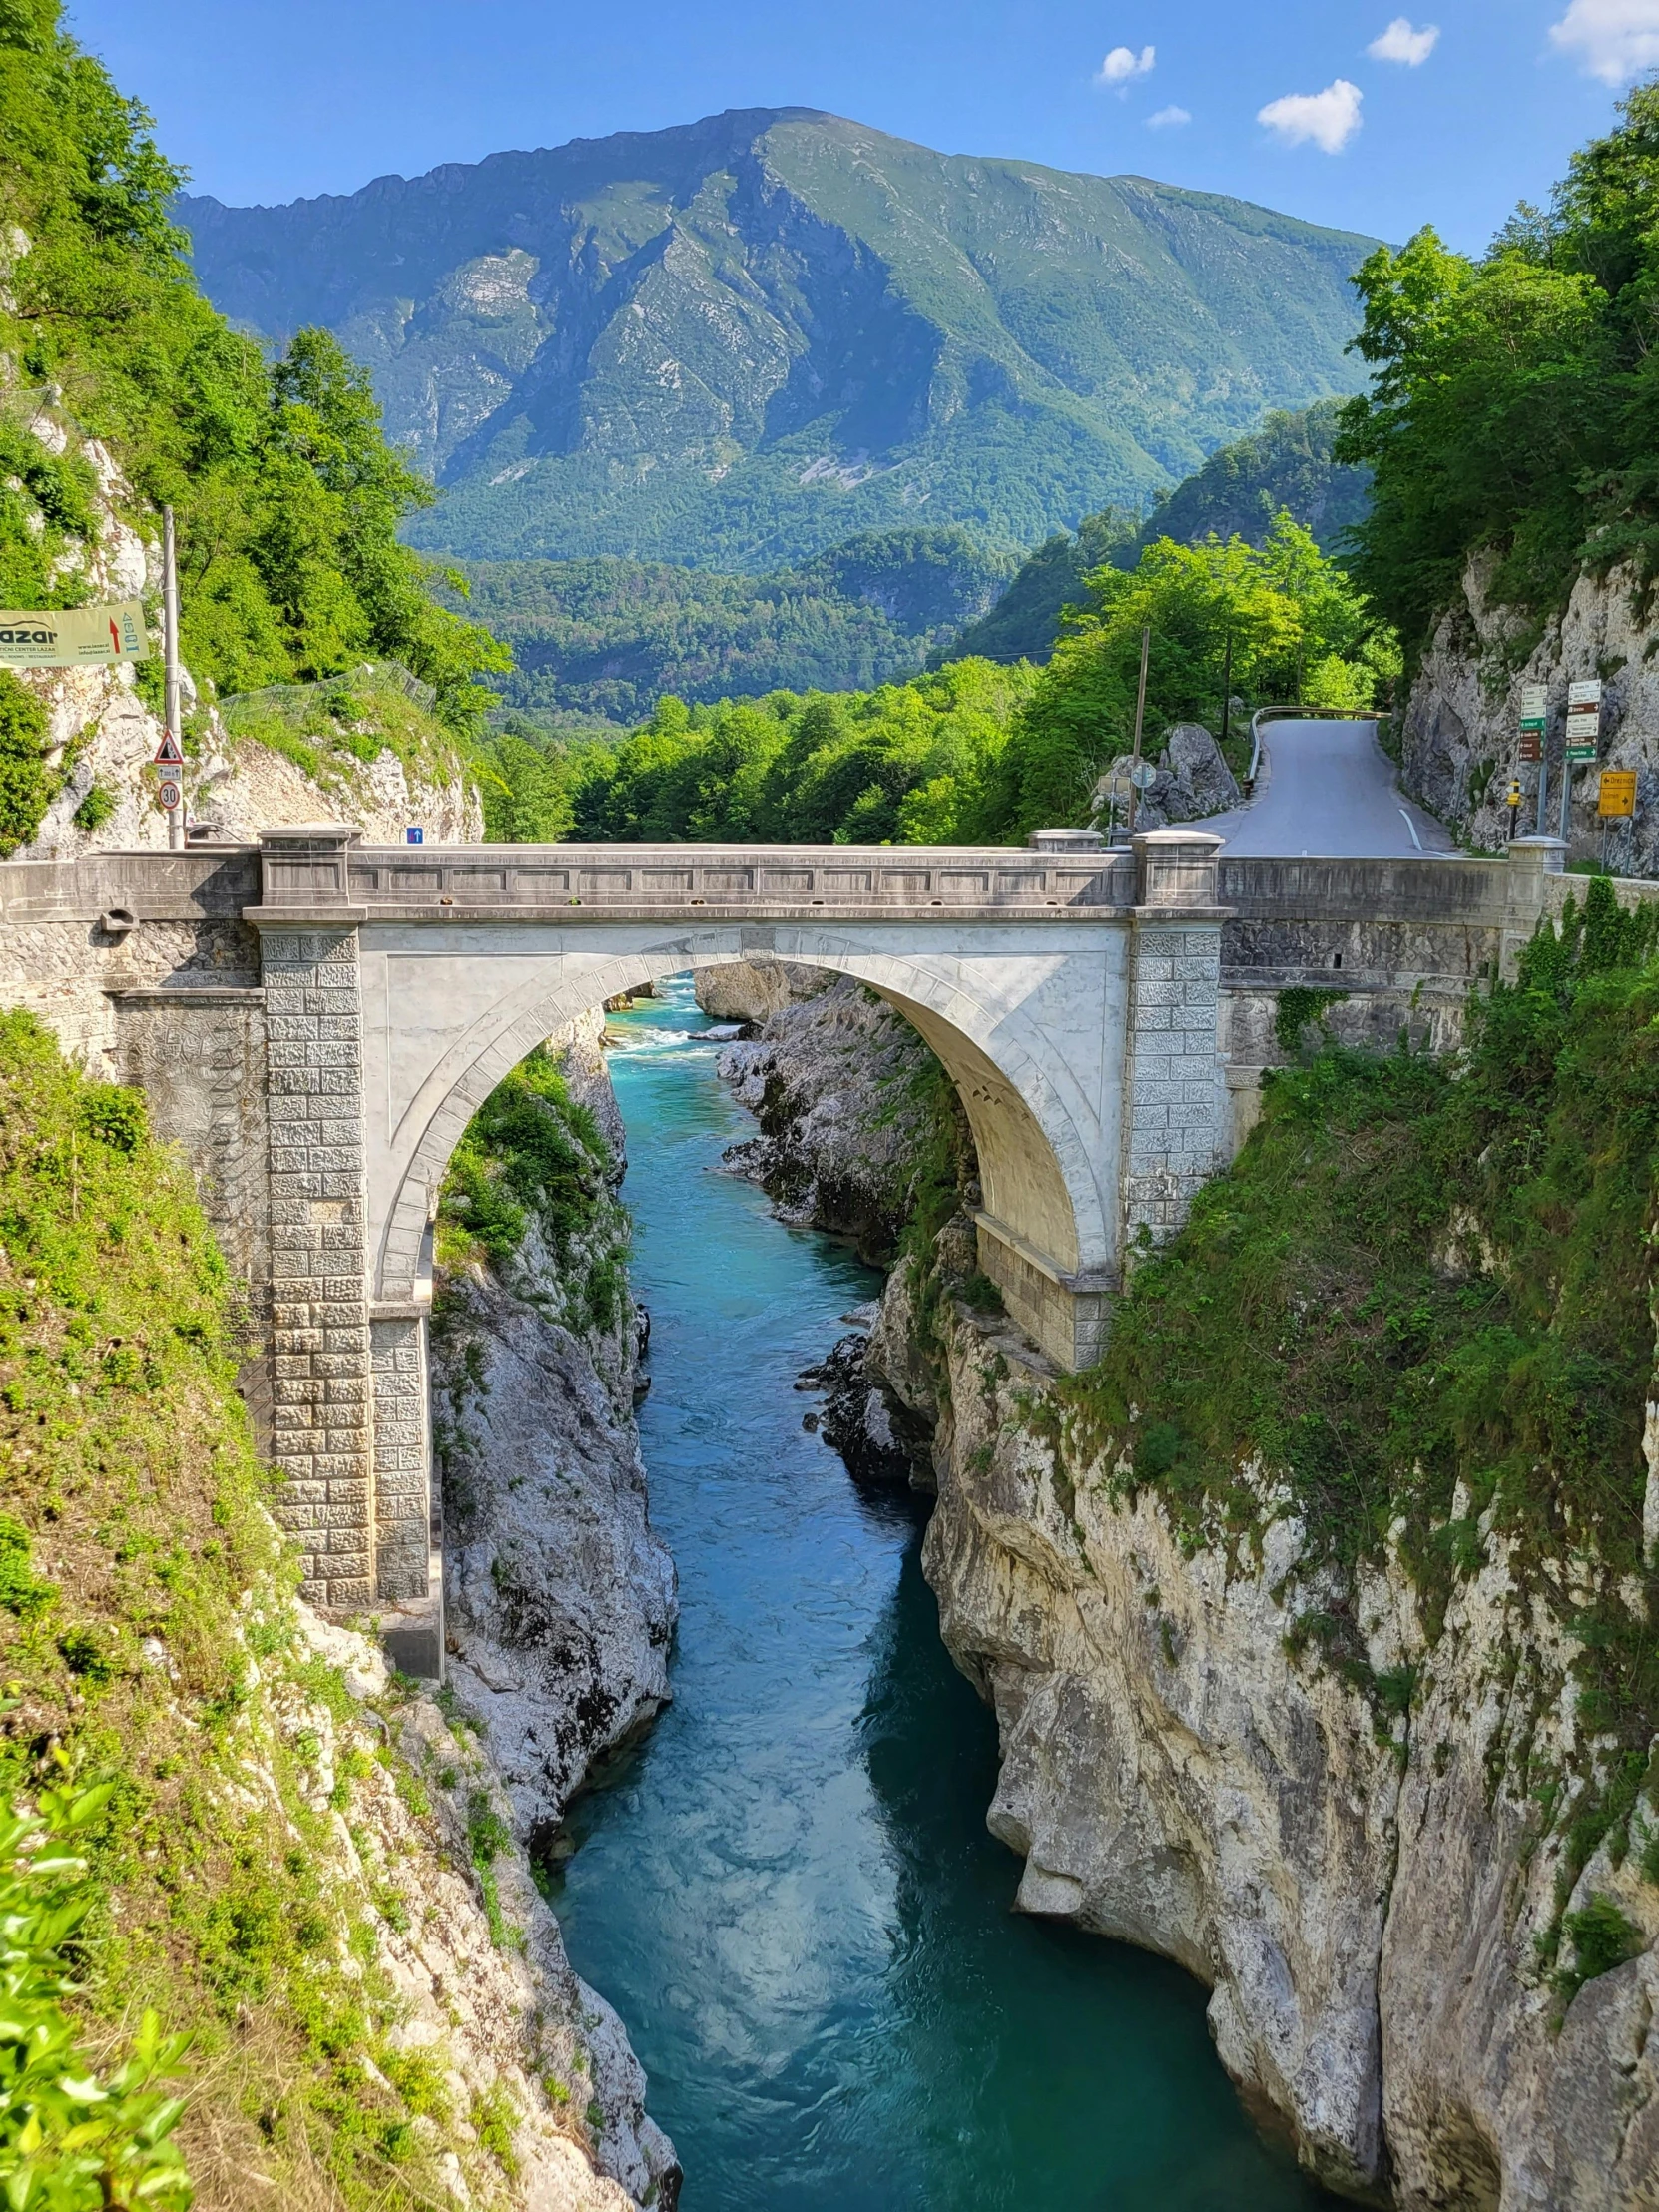 a bridge that looks like it is going under the mountains